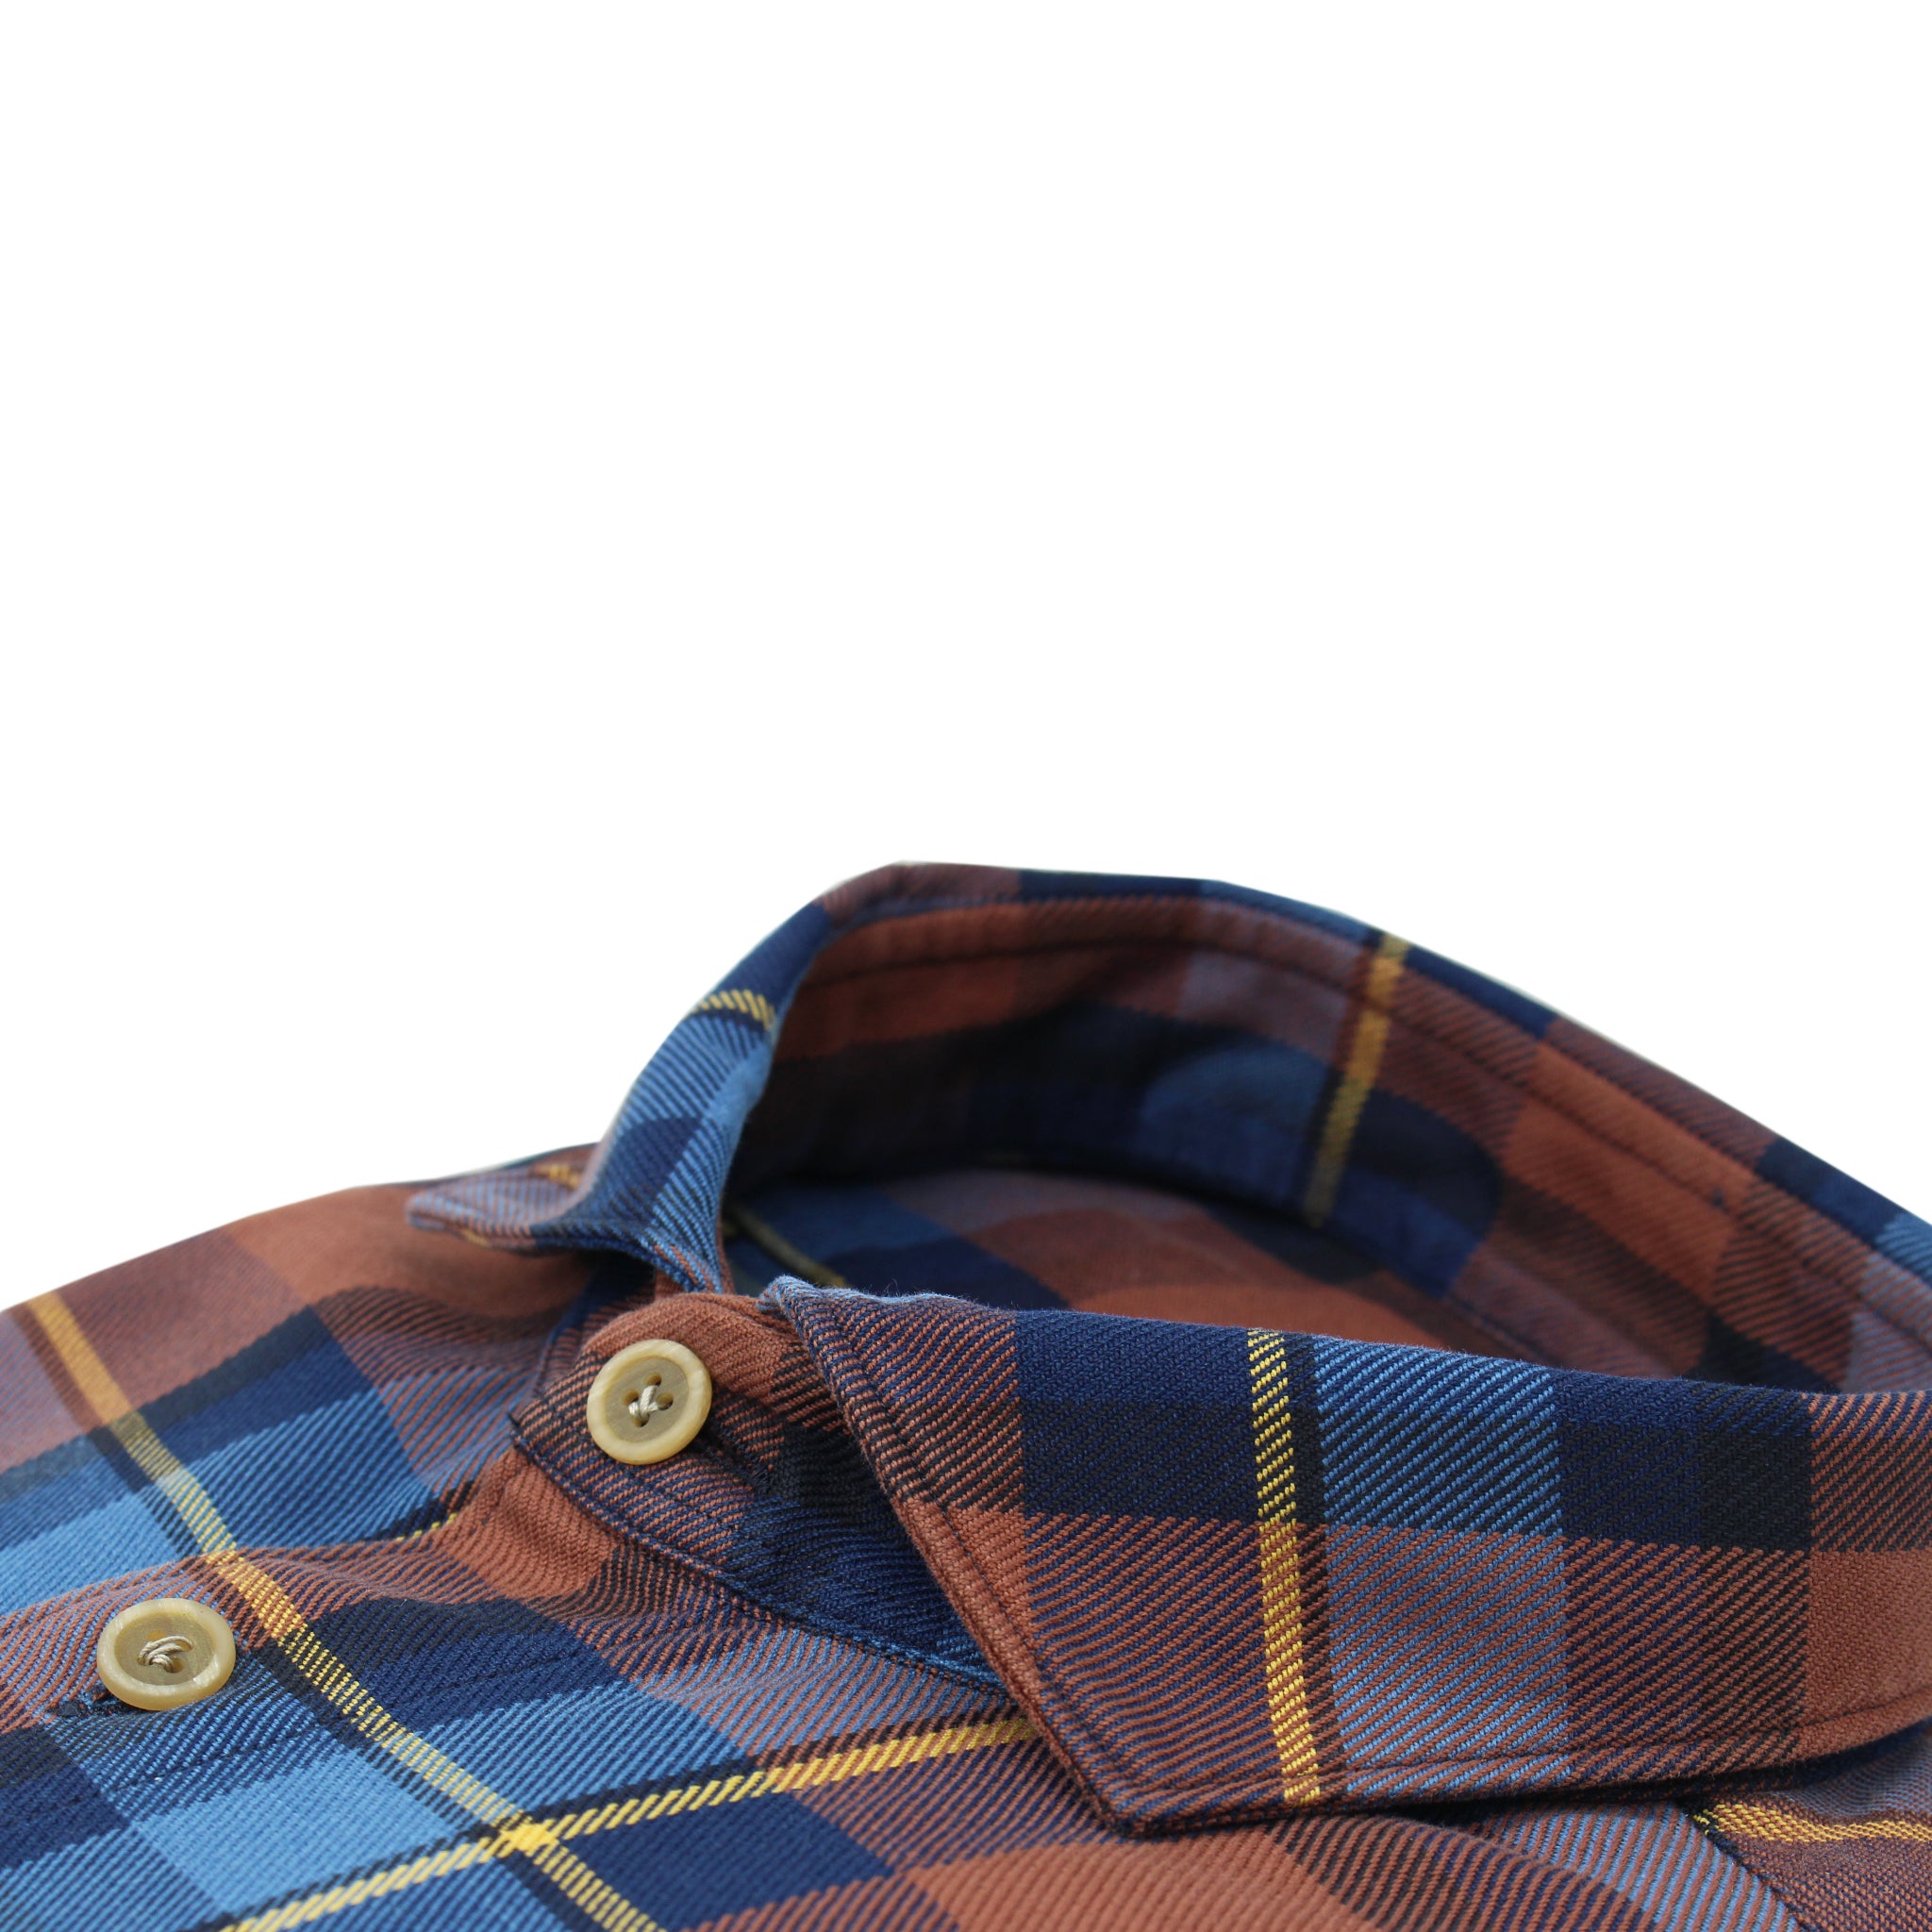 Madison Regular Fit sporty brown and orange checked cotton shirt